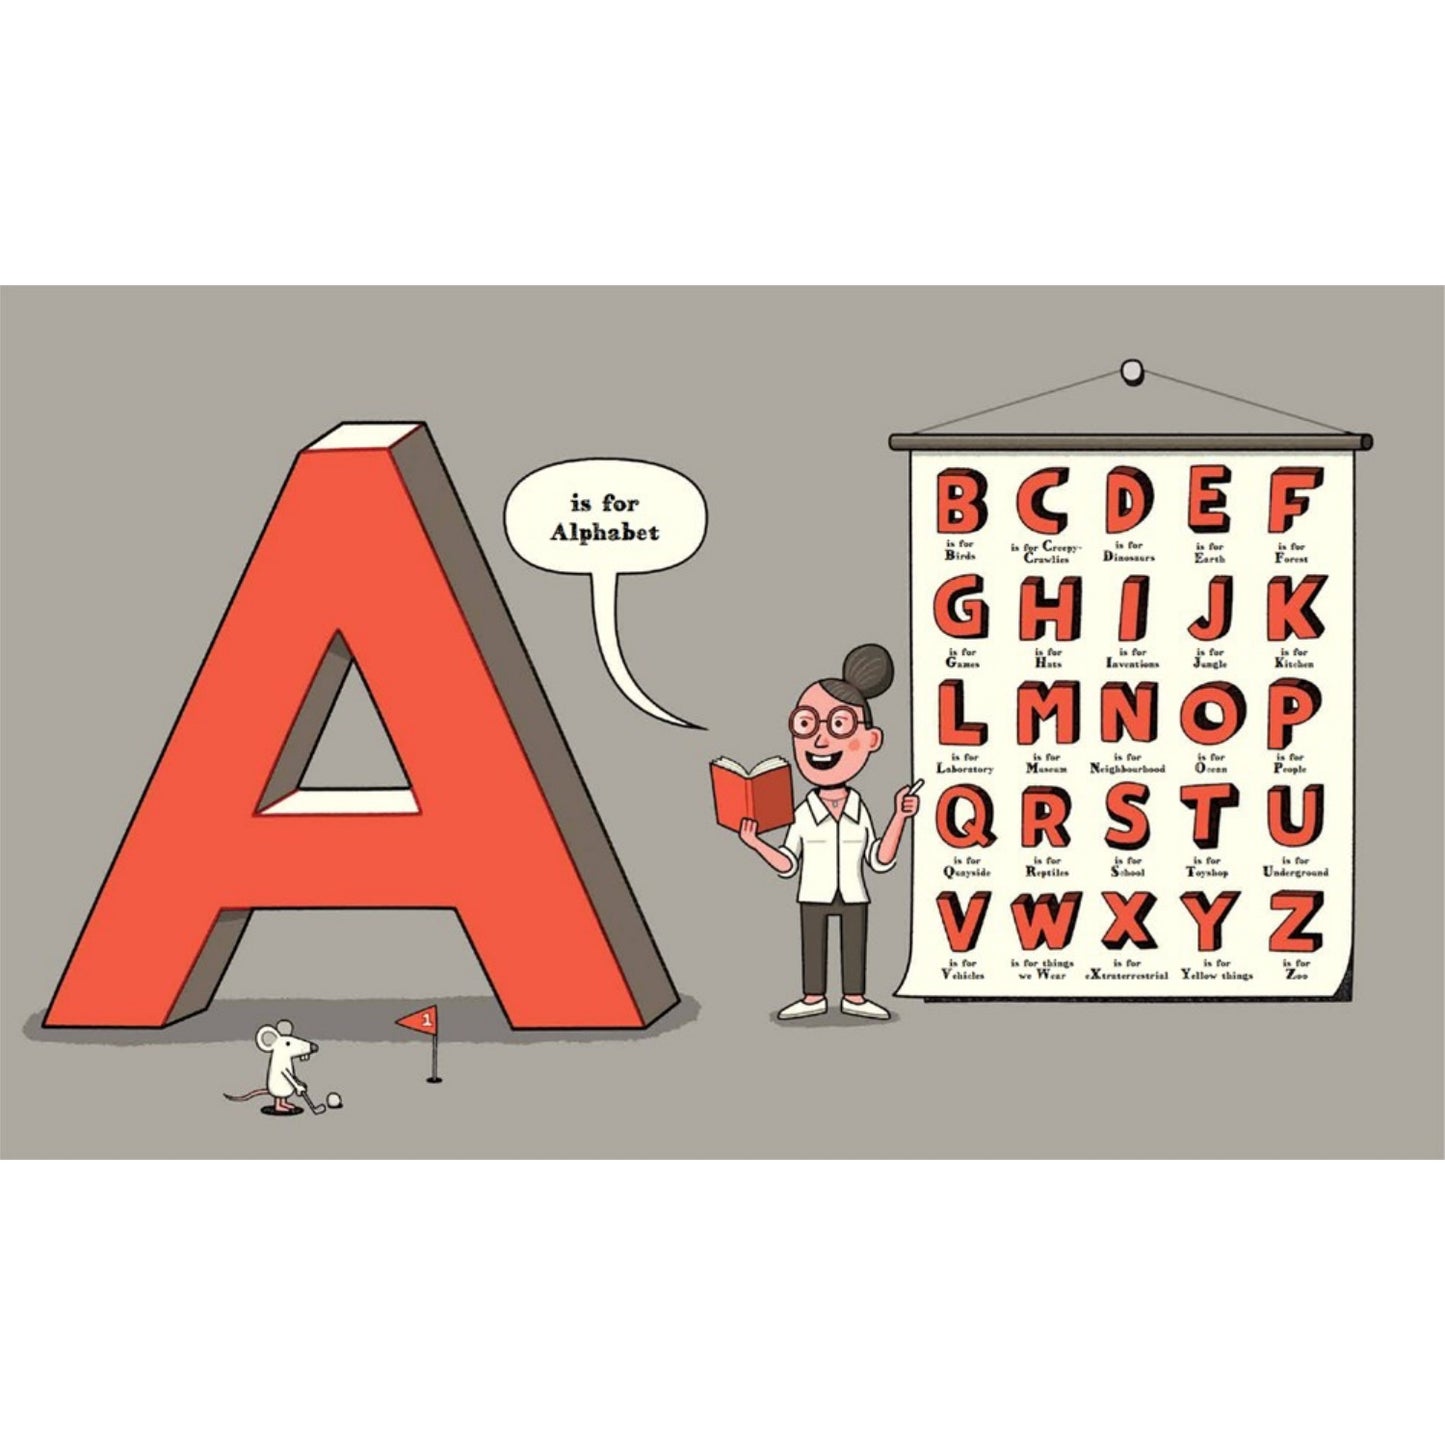 Search and Find Alphabet of Alphabets | Hardcover | Children's Early Learning Book